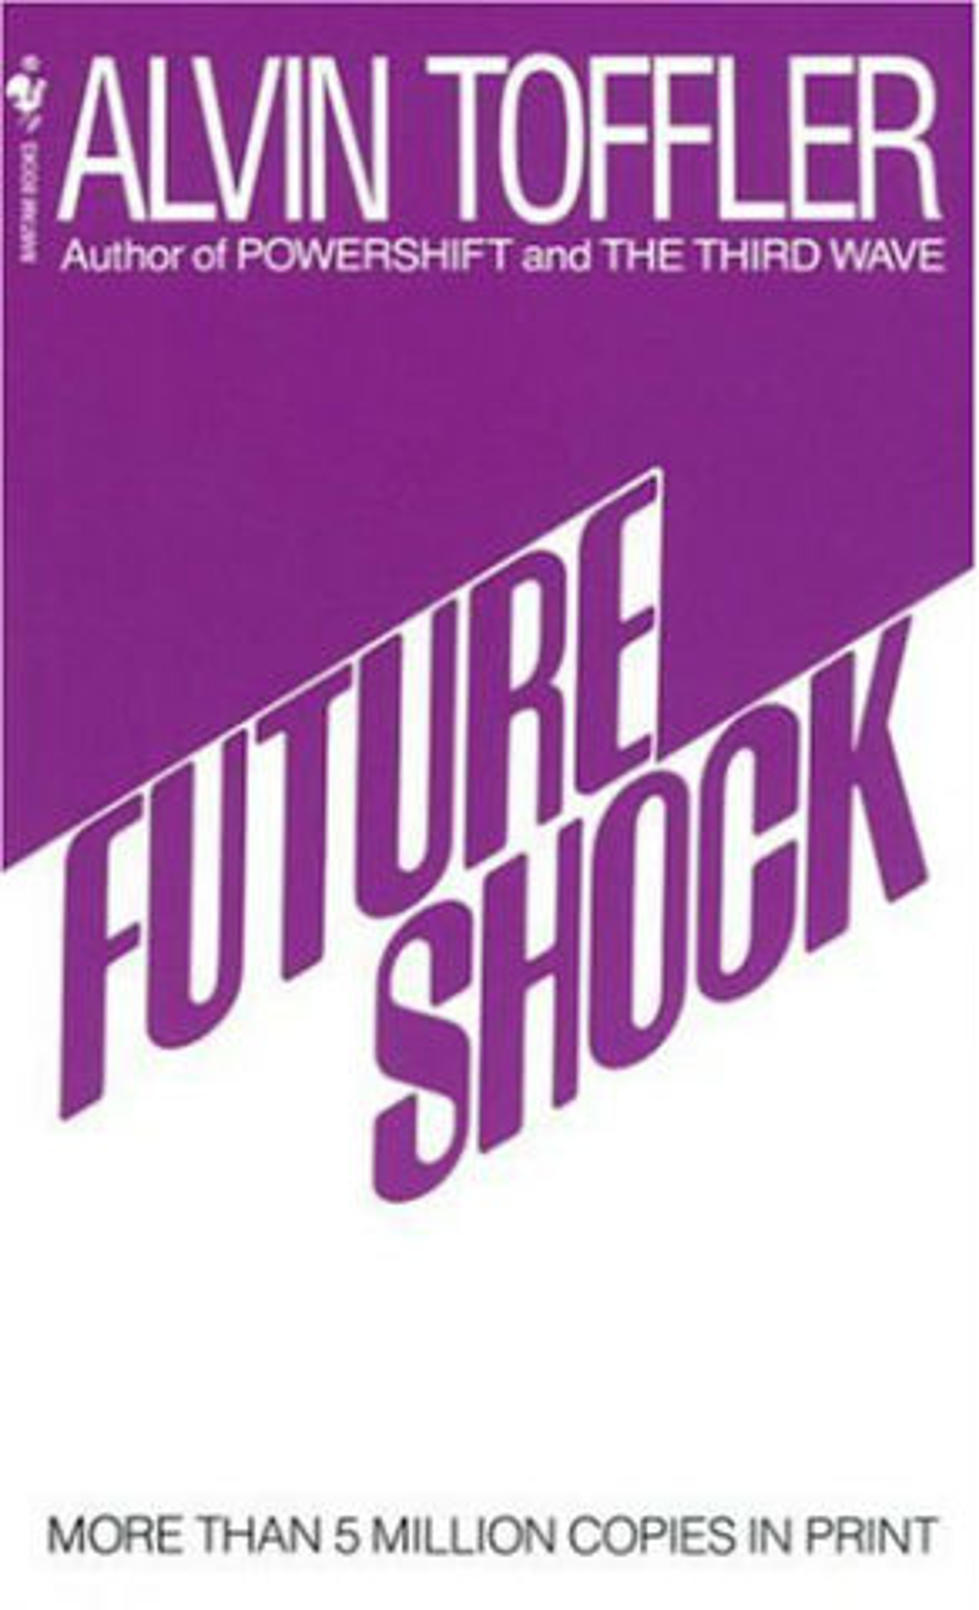 Has Technology Replaced Human Interaction?  Do We Have “Futureshock?”